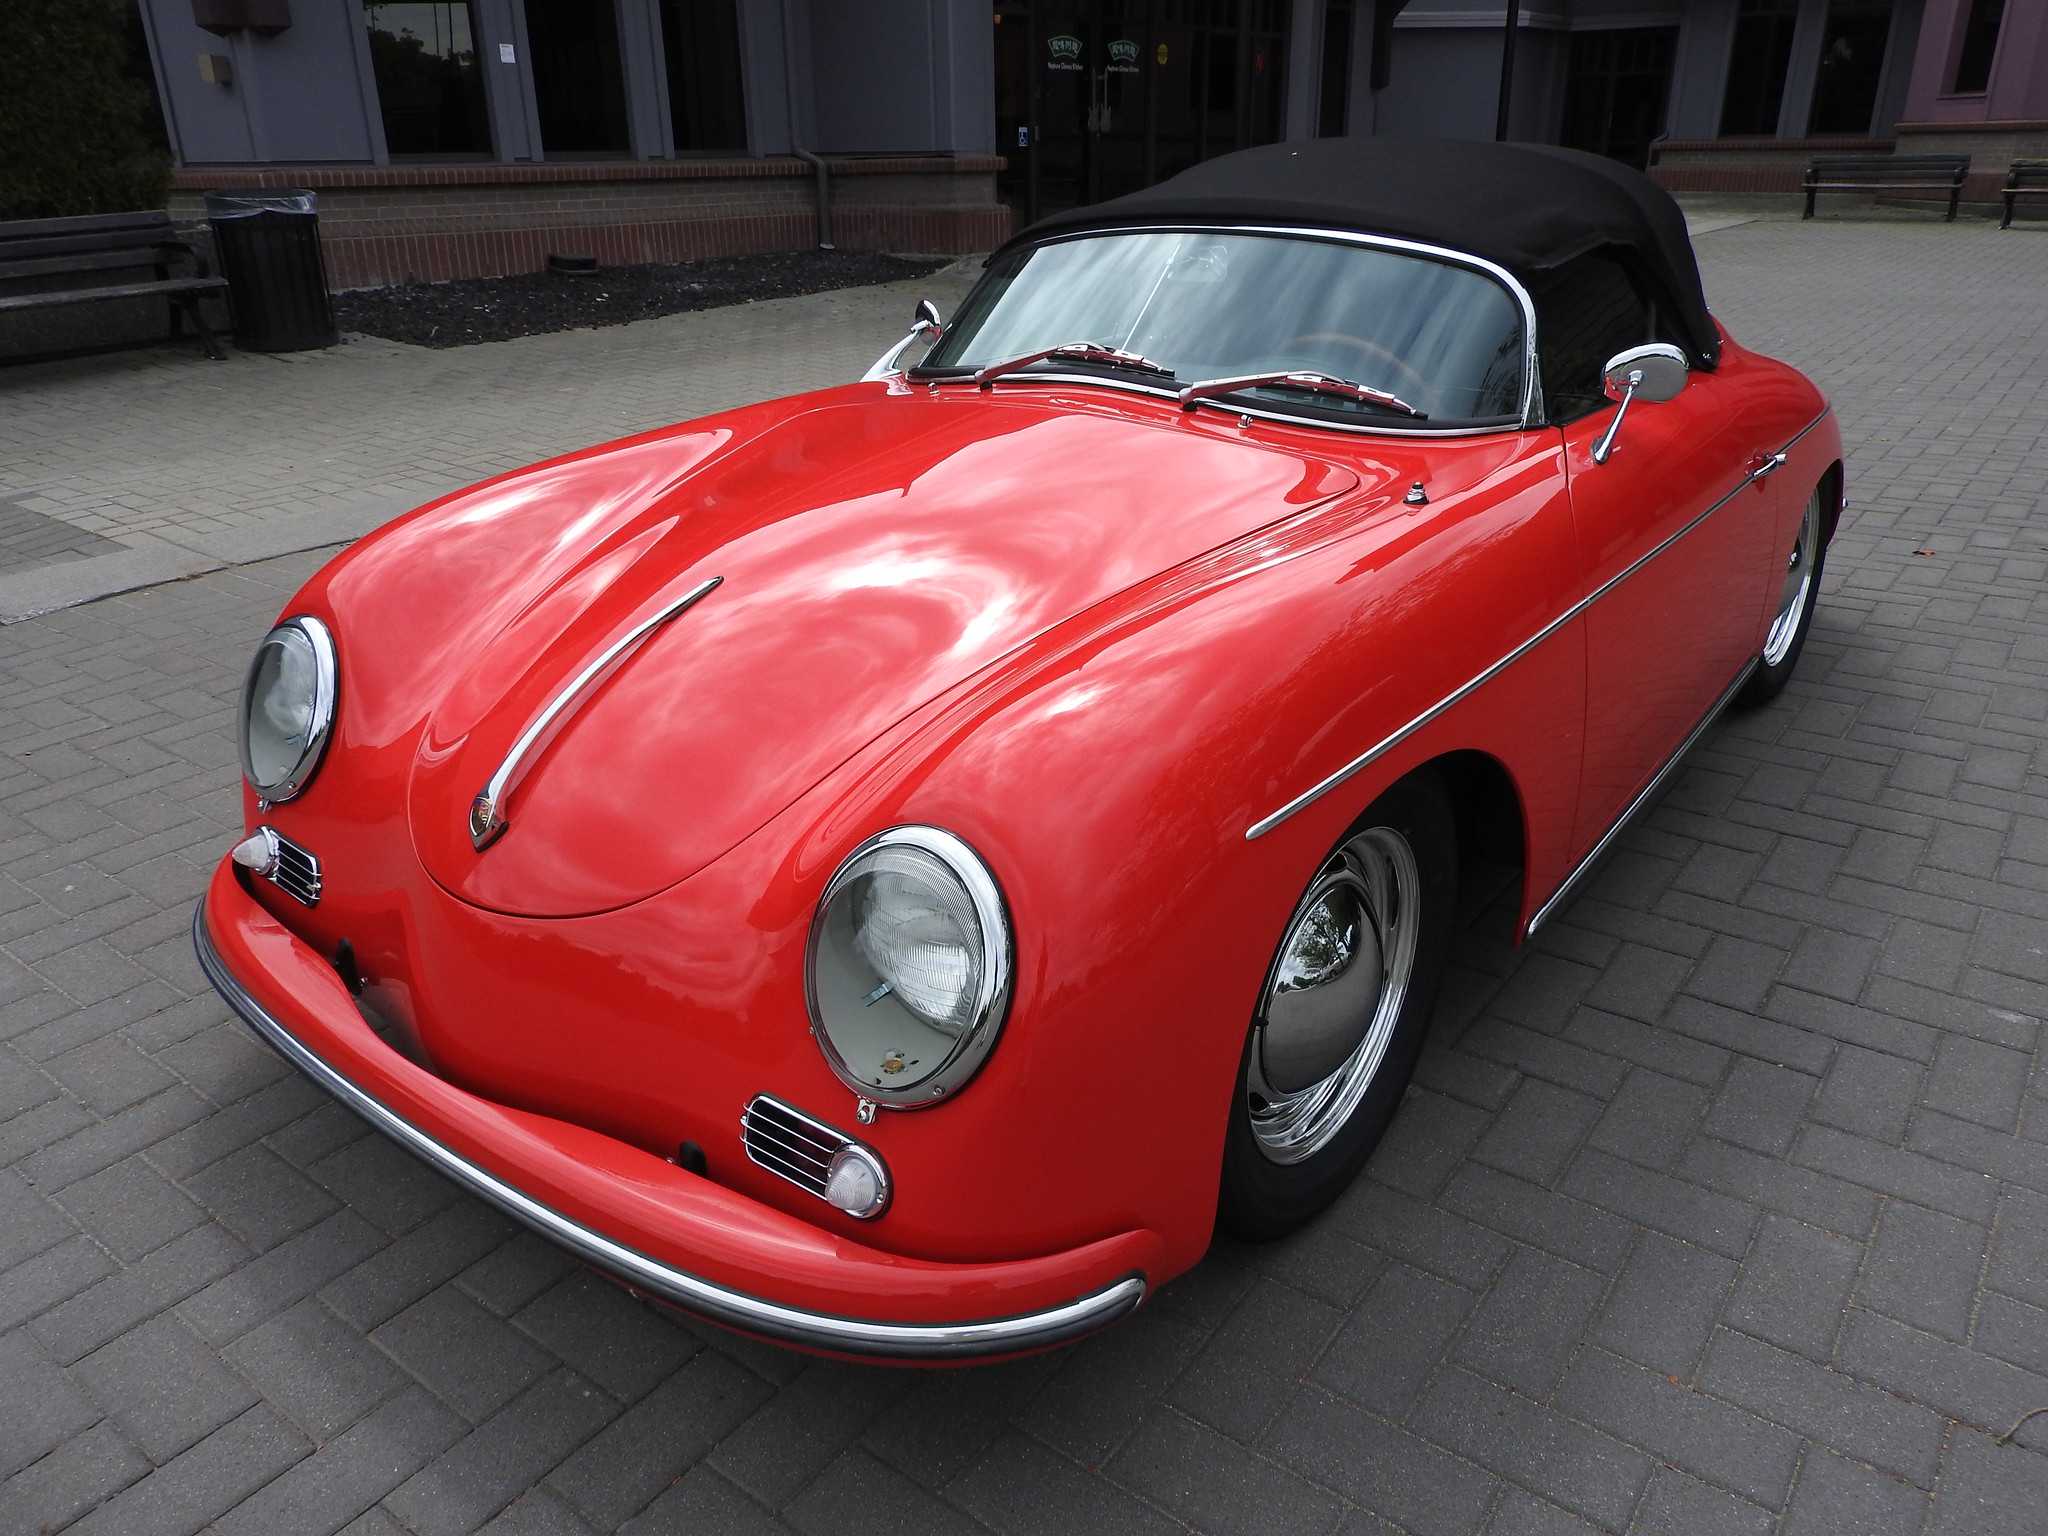 Red Intermeccanica Speedster with Black Convertible Top sits on cobbled plaza